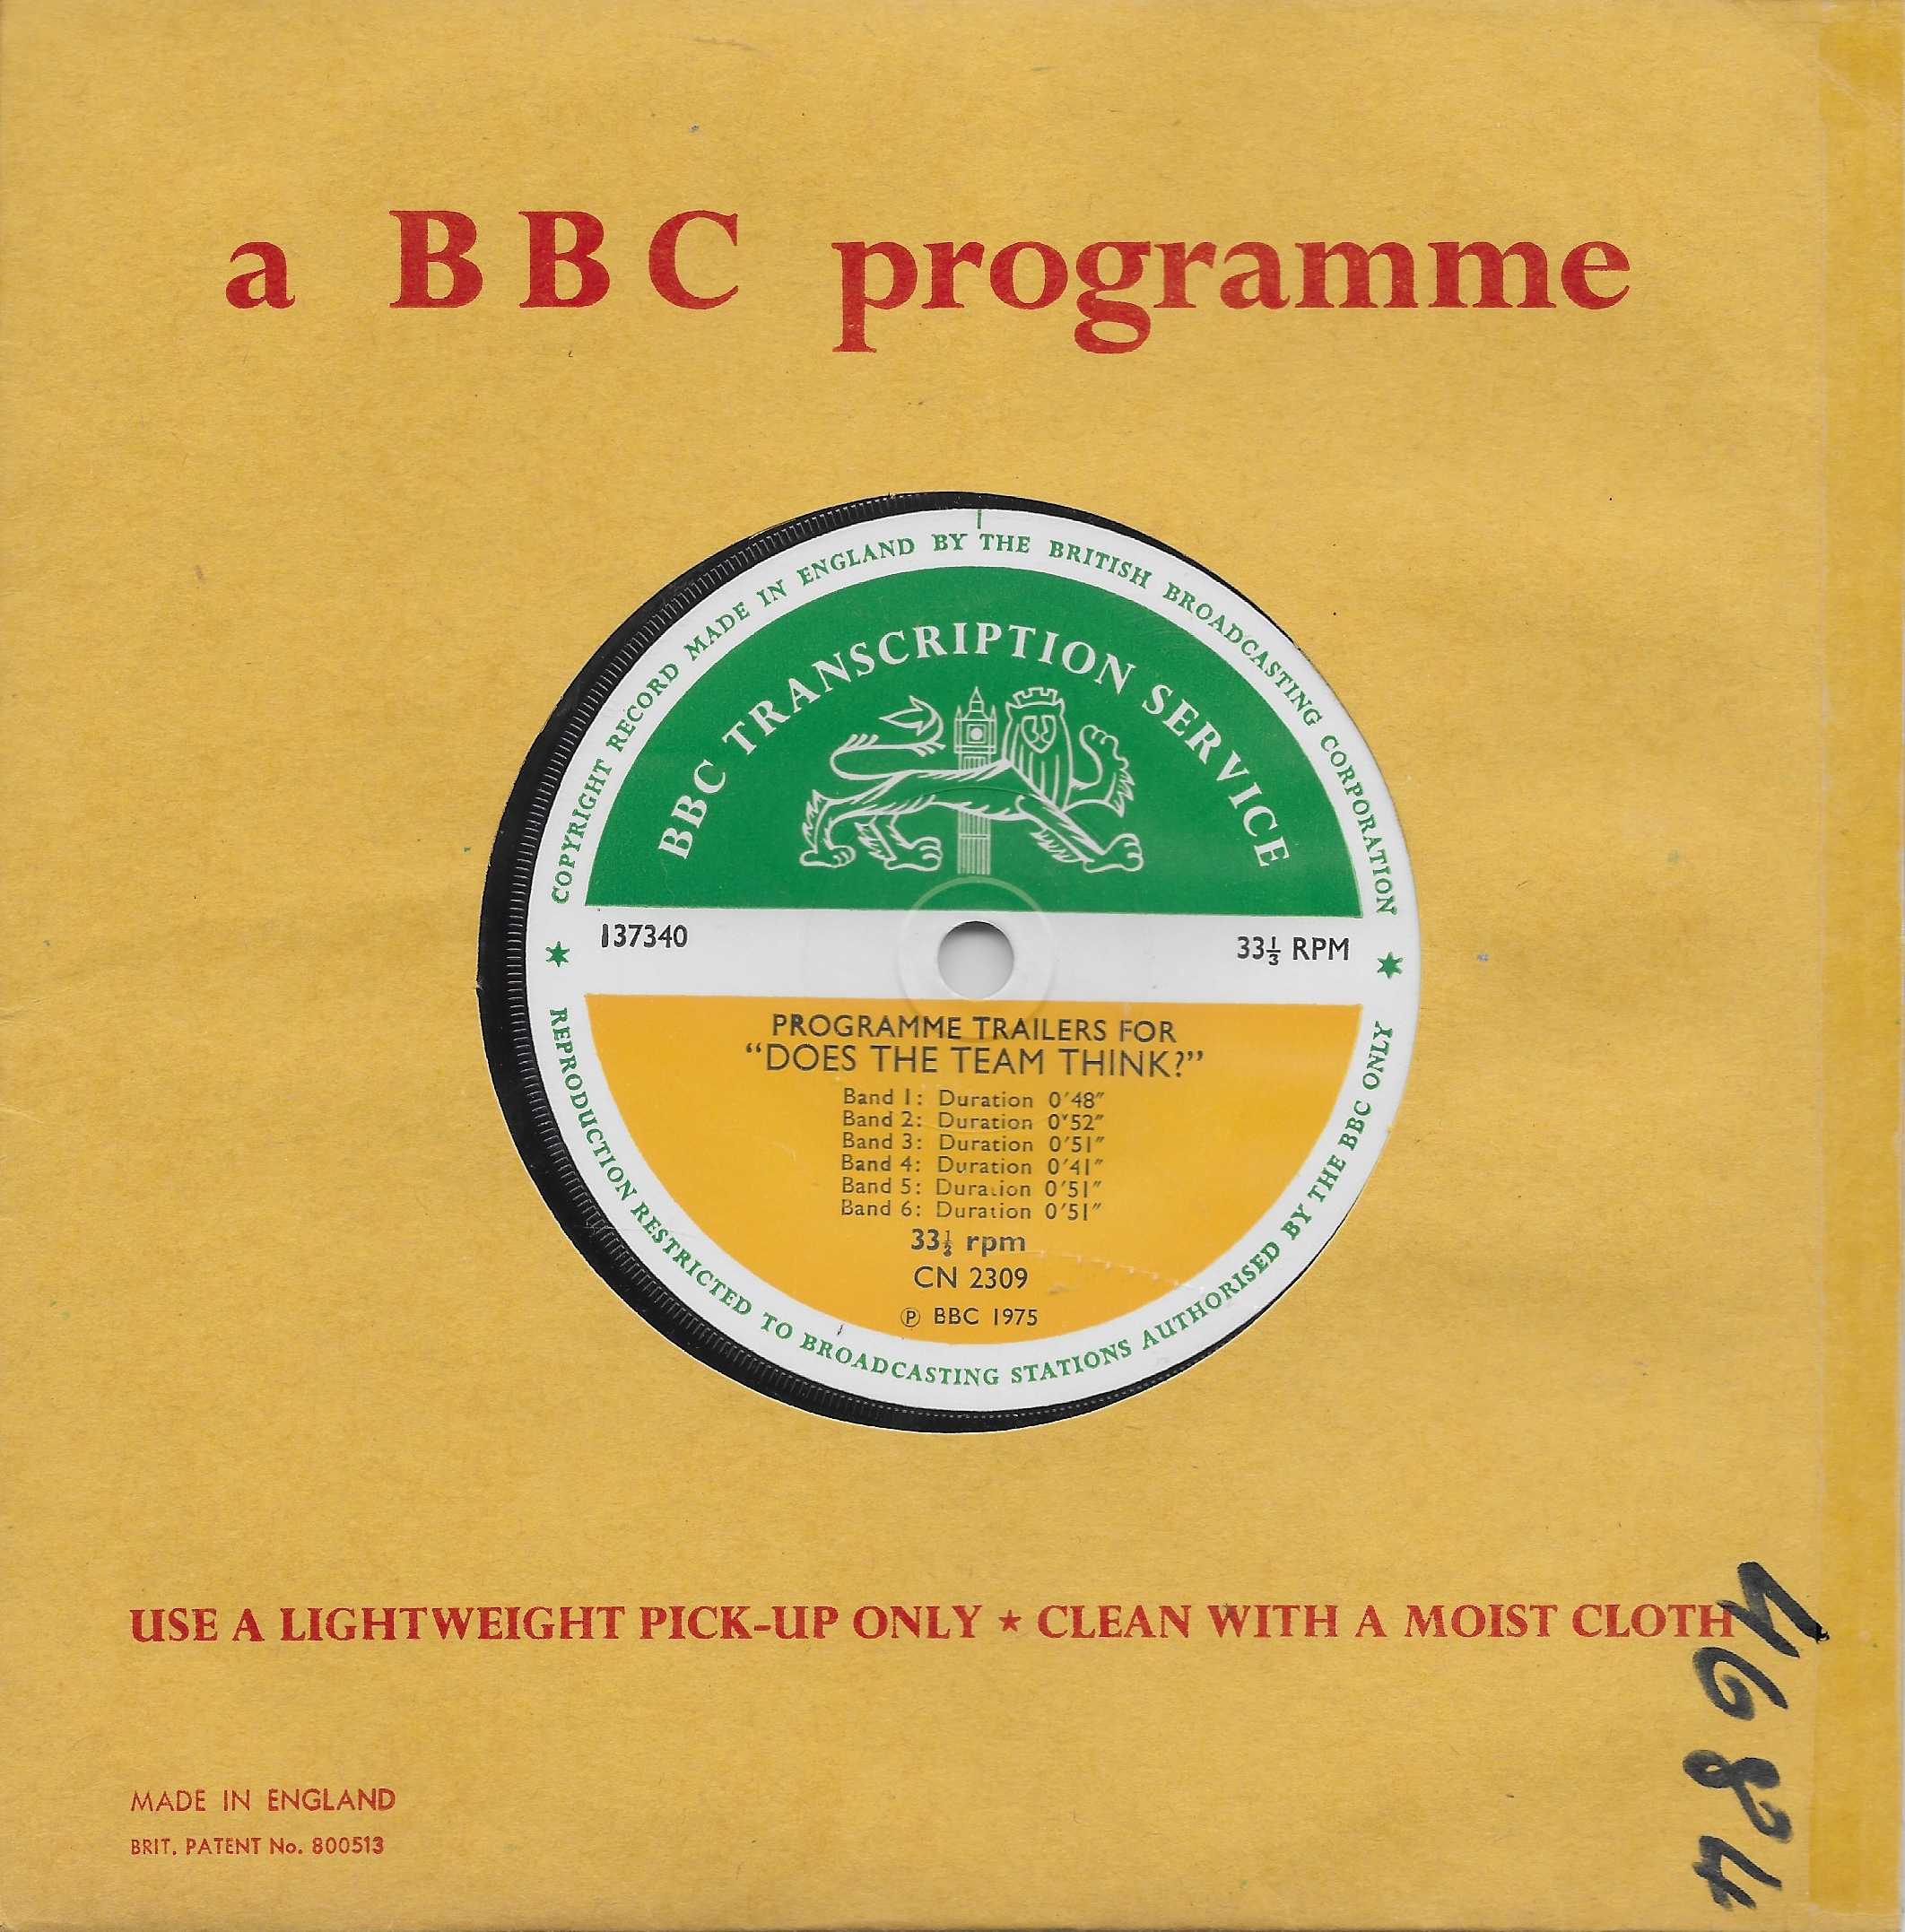 Picture of CN 2309 Programme trailers for "Does the team think?" by artist Unknown from the BBC records and Tapes library